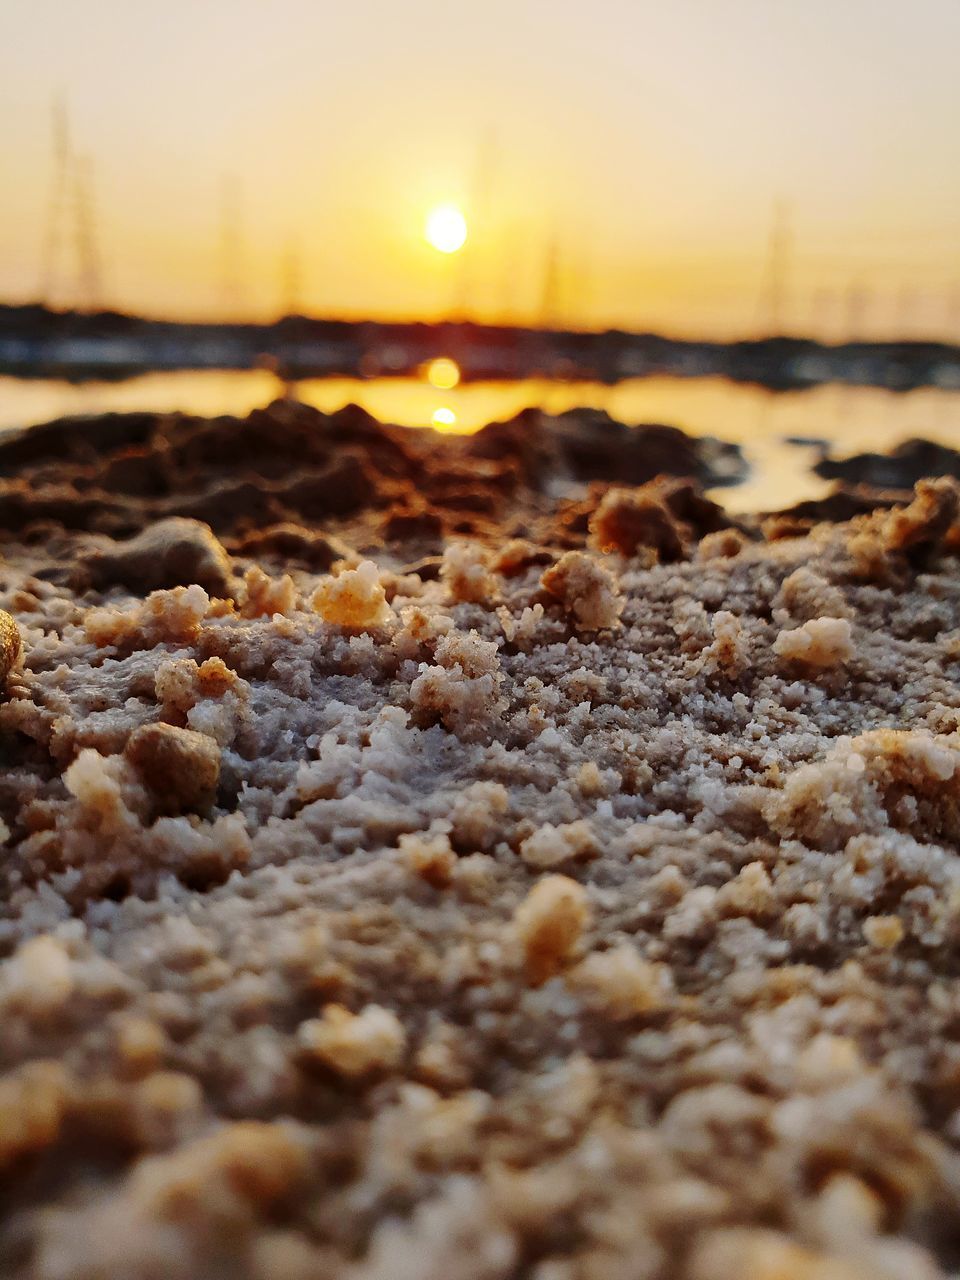 SURFACE LEVEL OF ROCKS AT BEACH DURING SUNSET